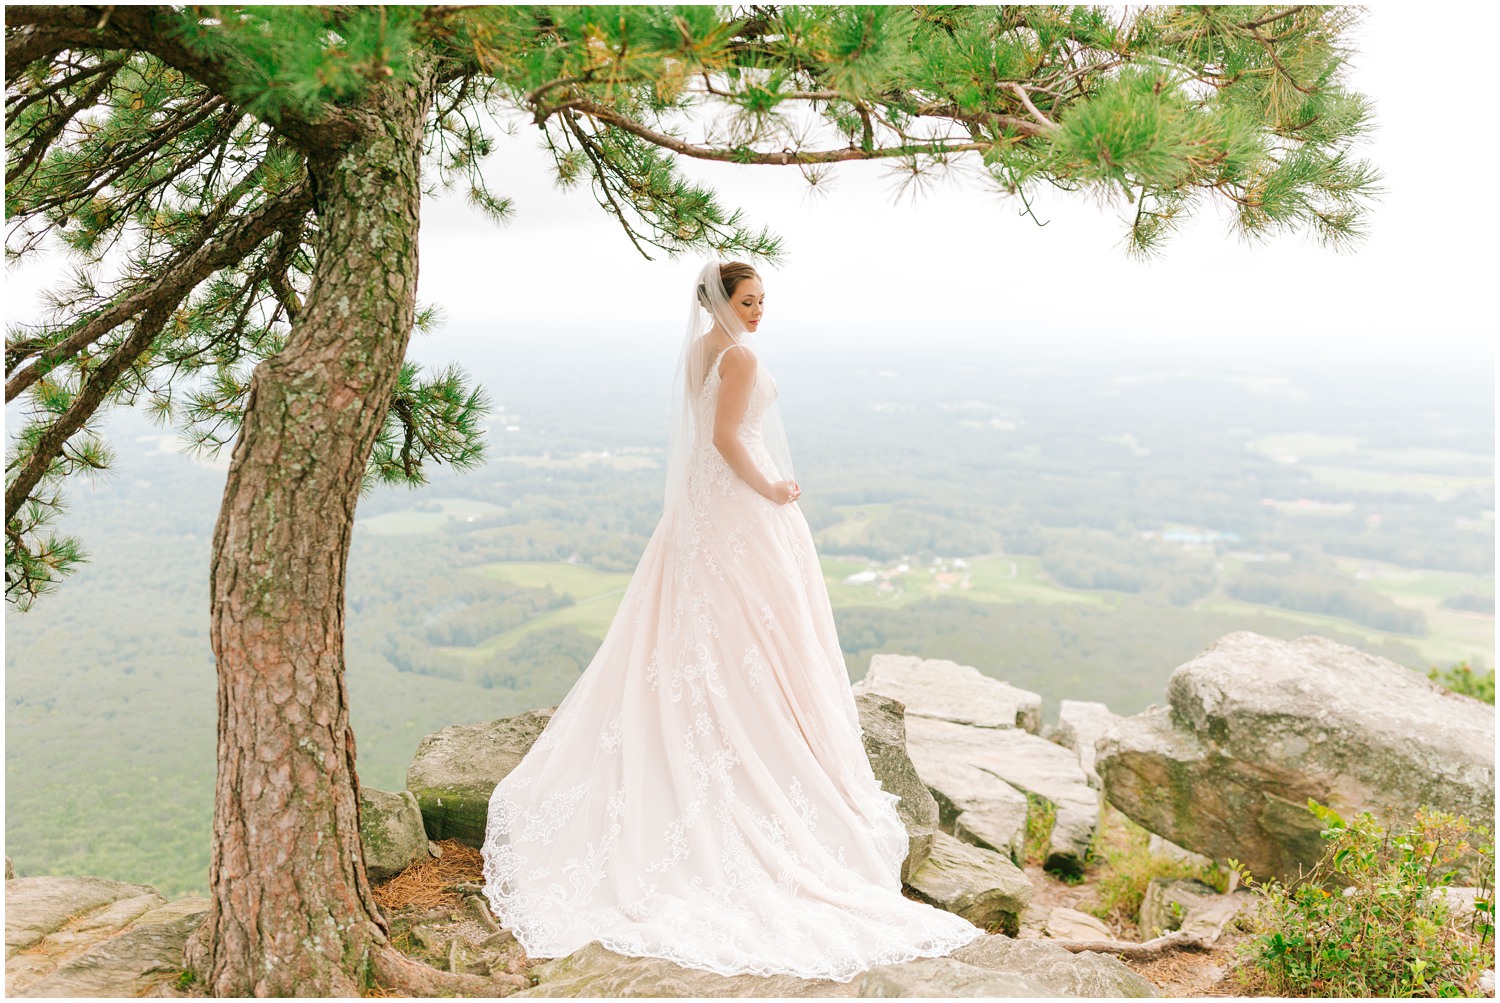 North Carolina bride looks over shoulder with veil in Pilot Mountain state park